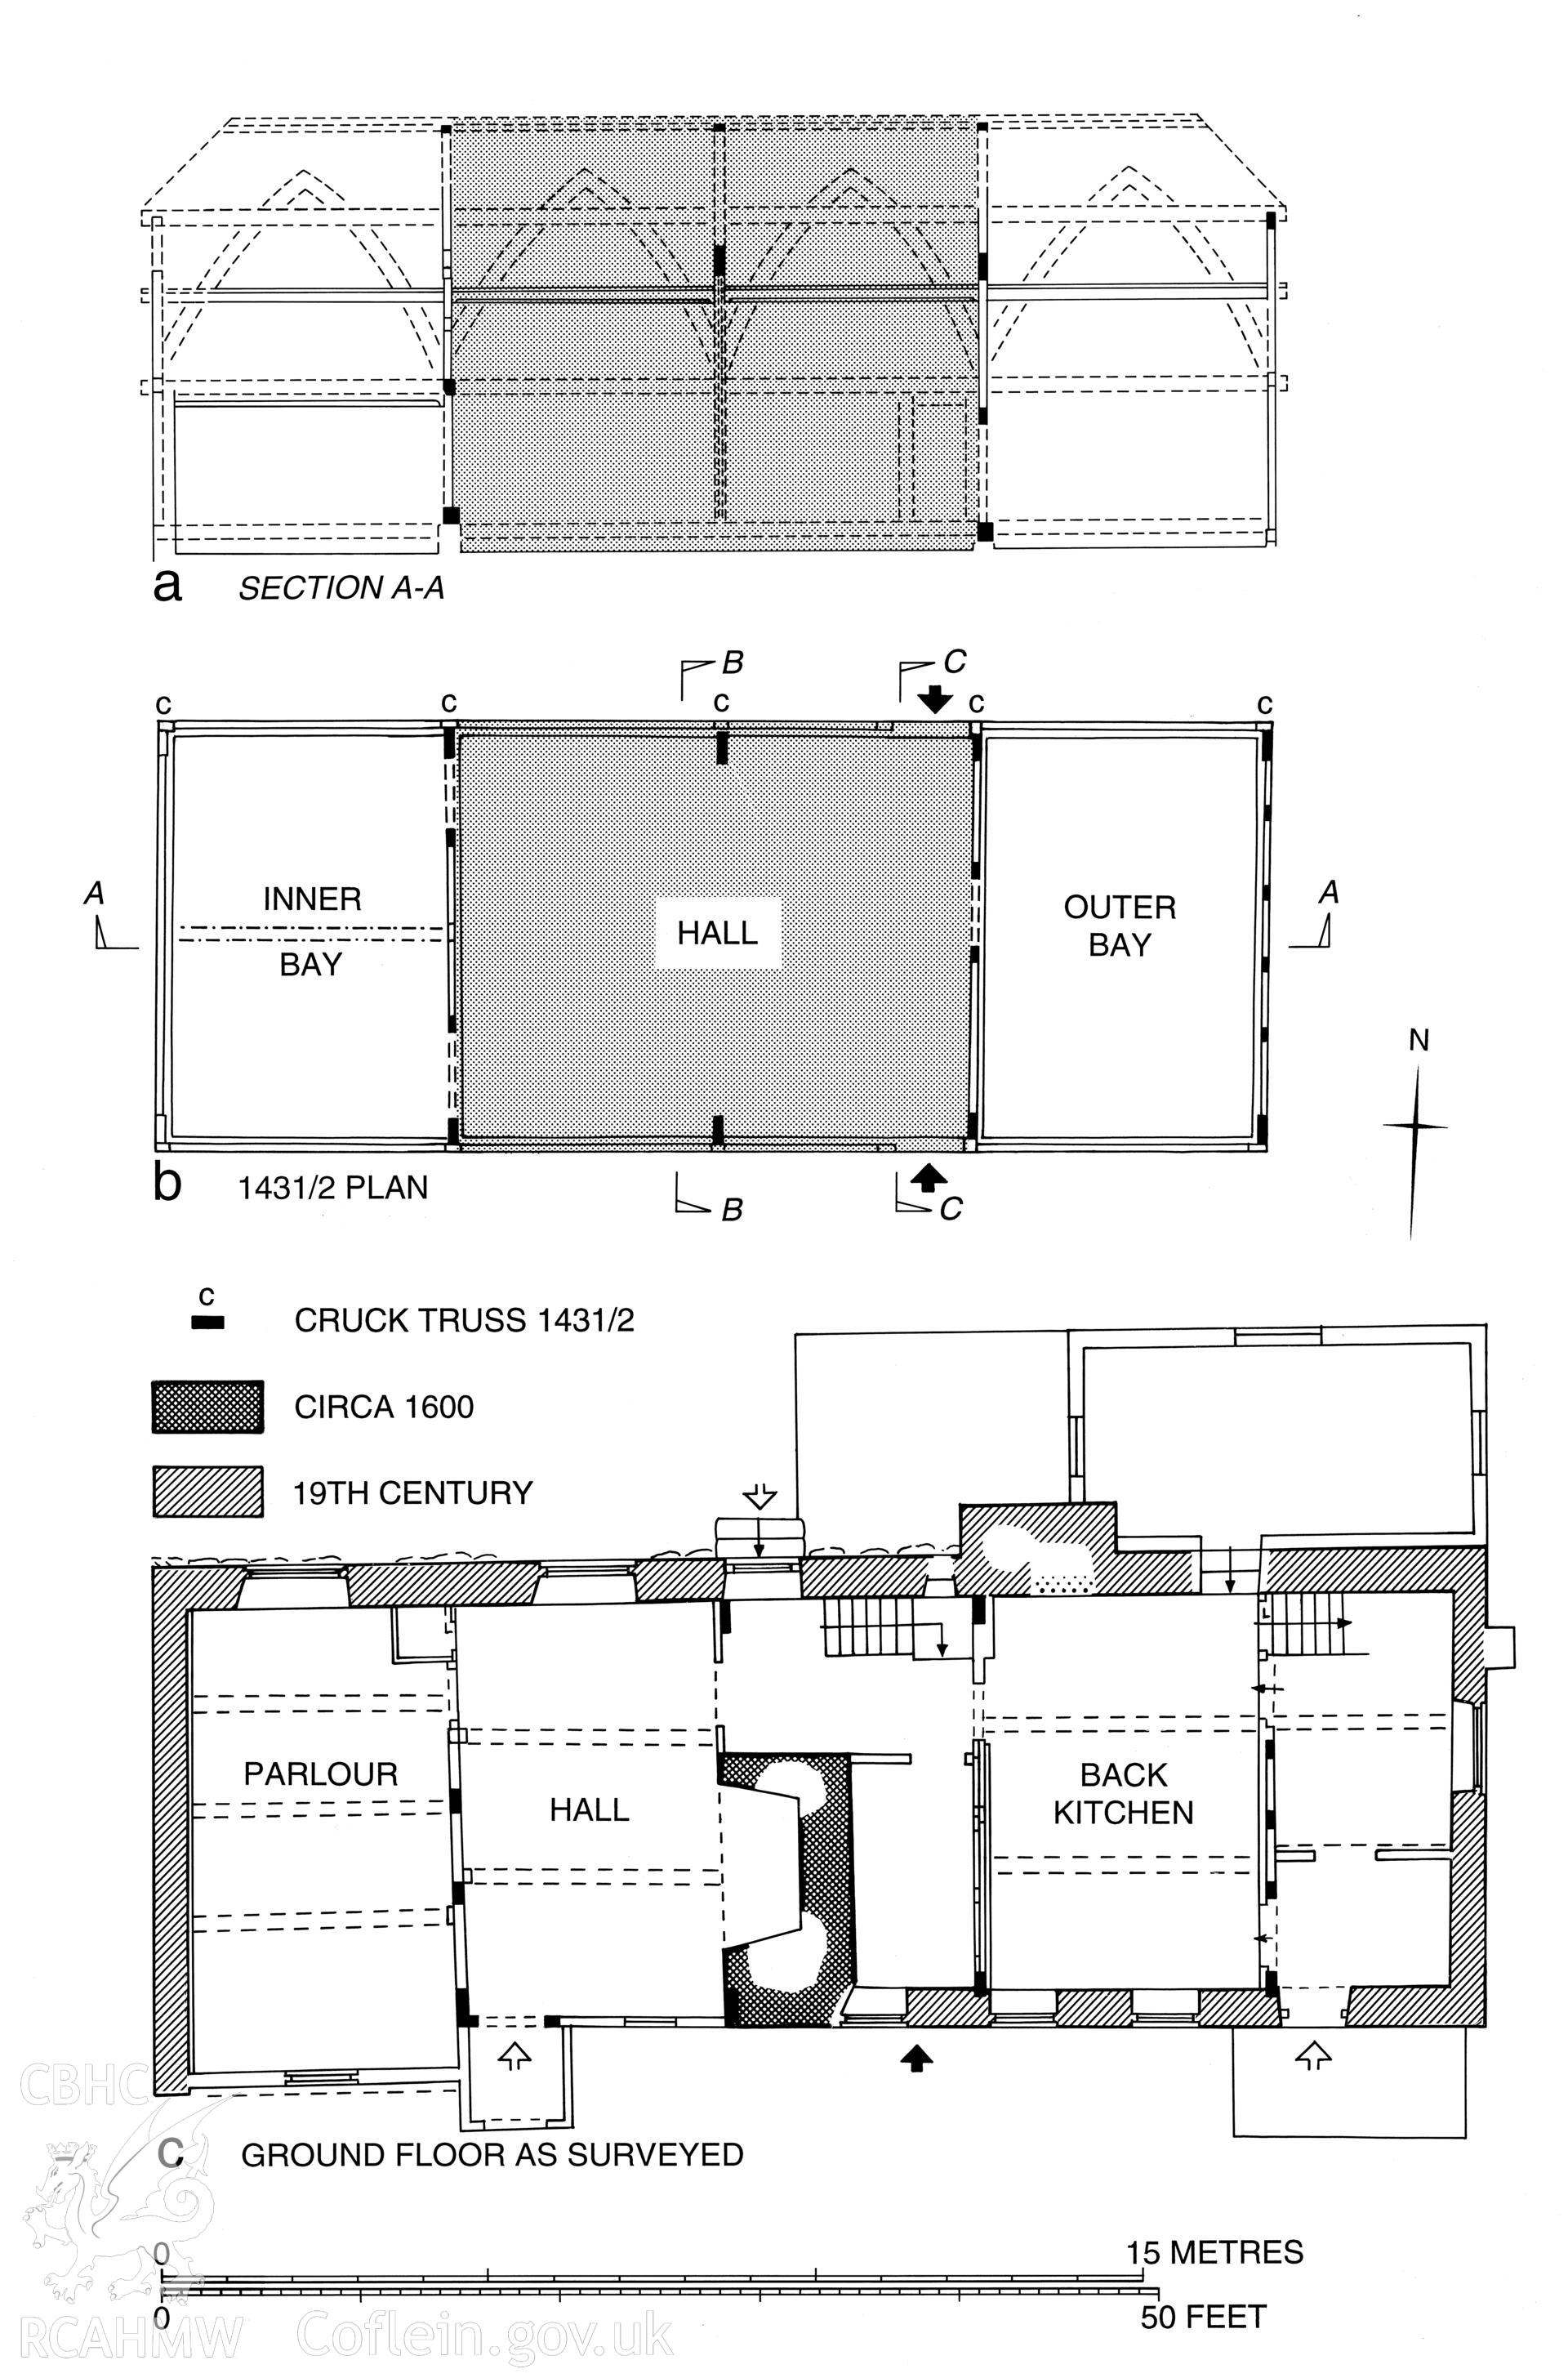 Llanshay, Knighton; measured drawing showing longitudinal section, ground floor plan as surveyed and reconstructed plan of 1431-1432, as published in the RCAHMW volume, Houses and History in the Marches of Wales.  Radnorshire 1400-1800,  page 67, figure 61.